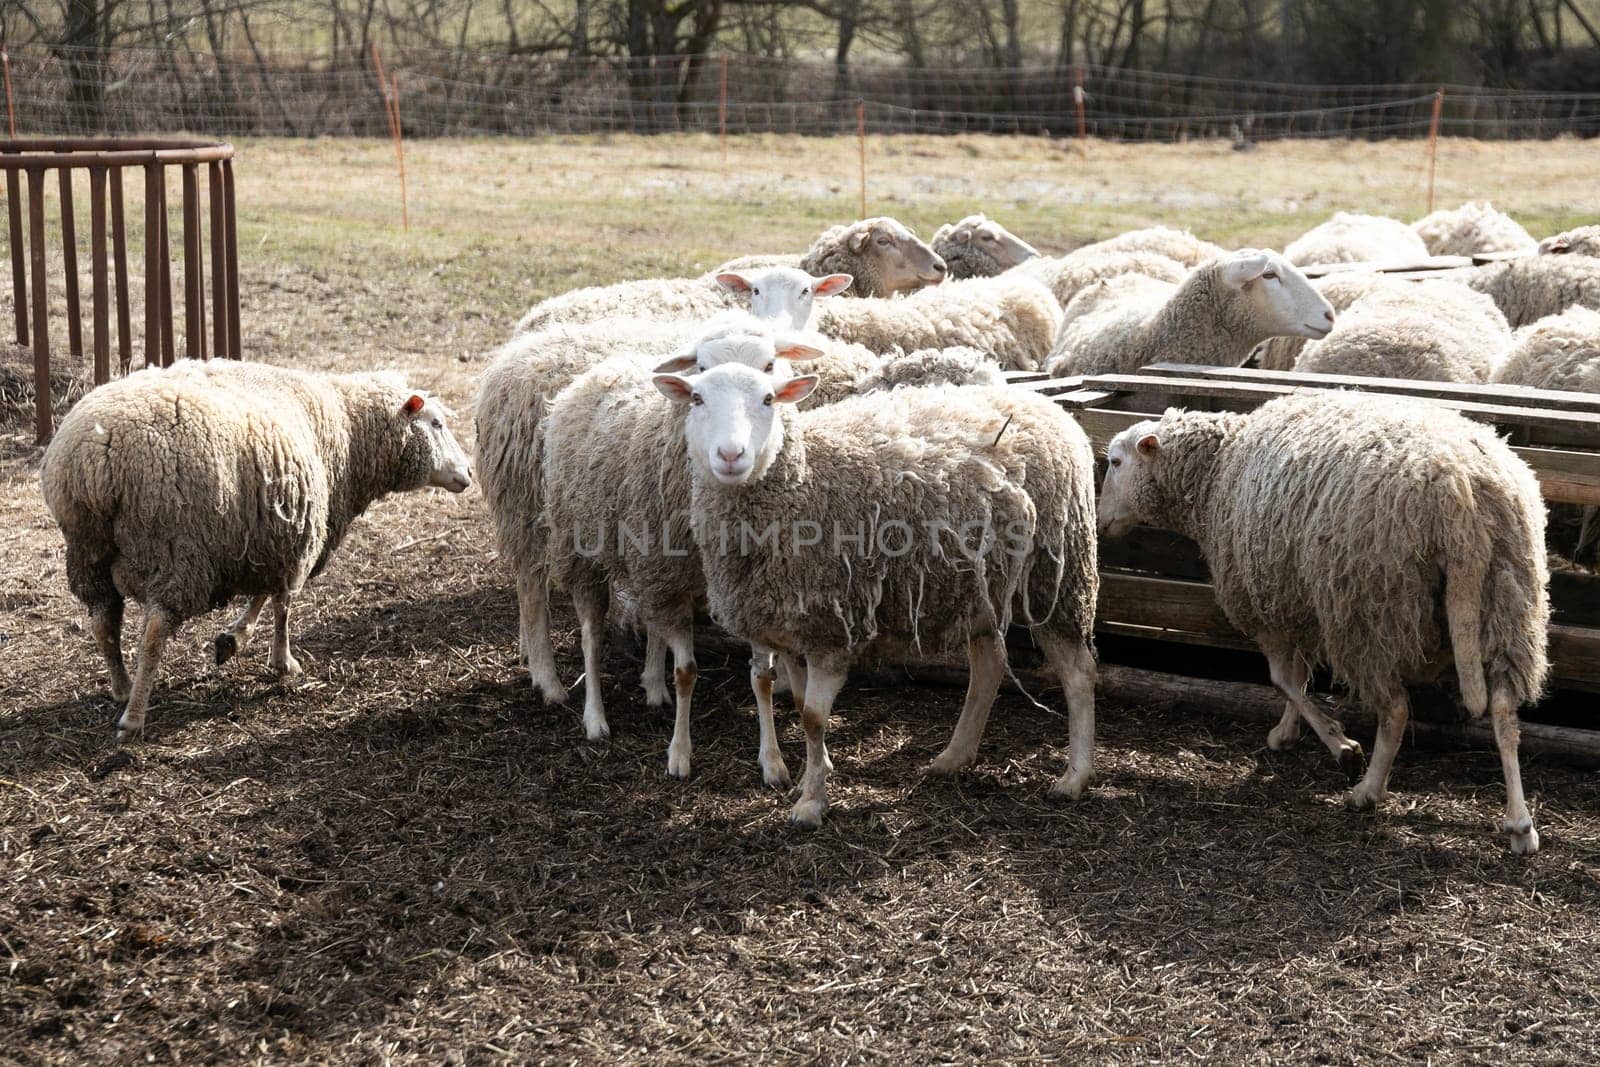 A herd of sheep is gathered on top of a dry grass field. The sheep are standing still, grazing on the sparse vegetation. The scene depicts a typical day in the life of these animals as they forage for food in their natural habitat.